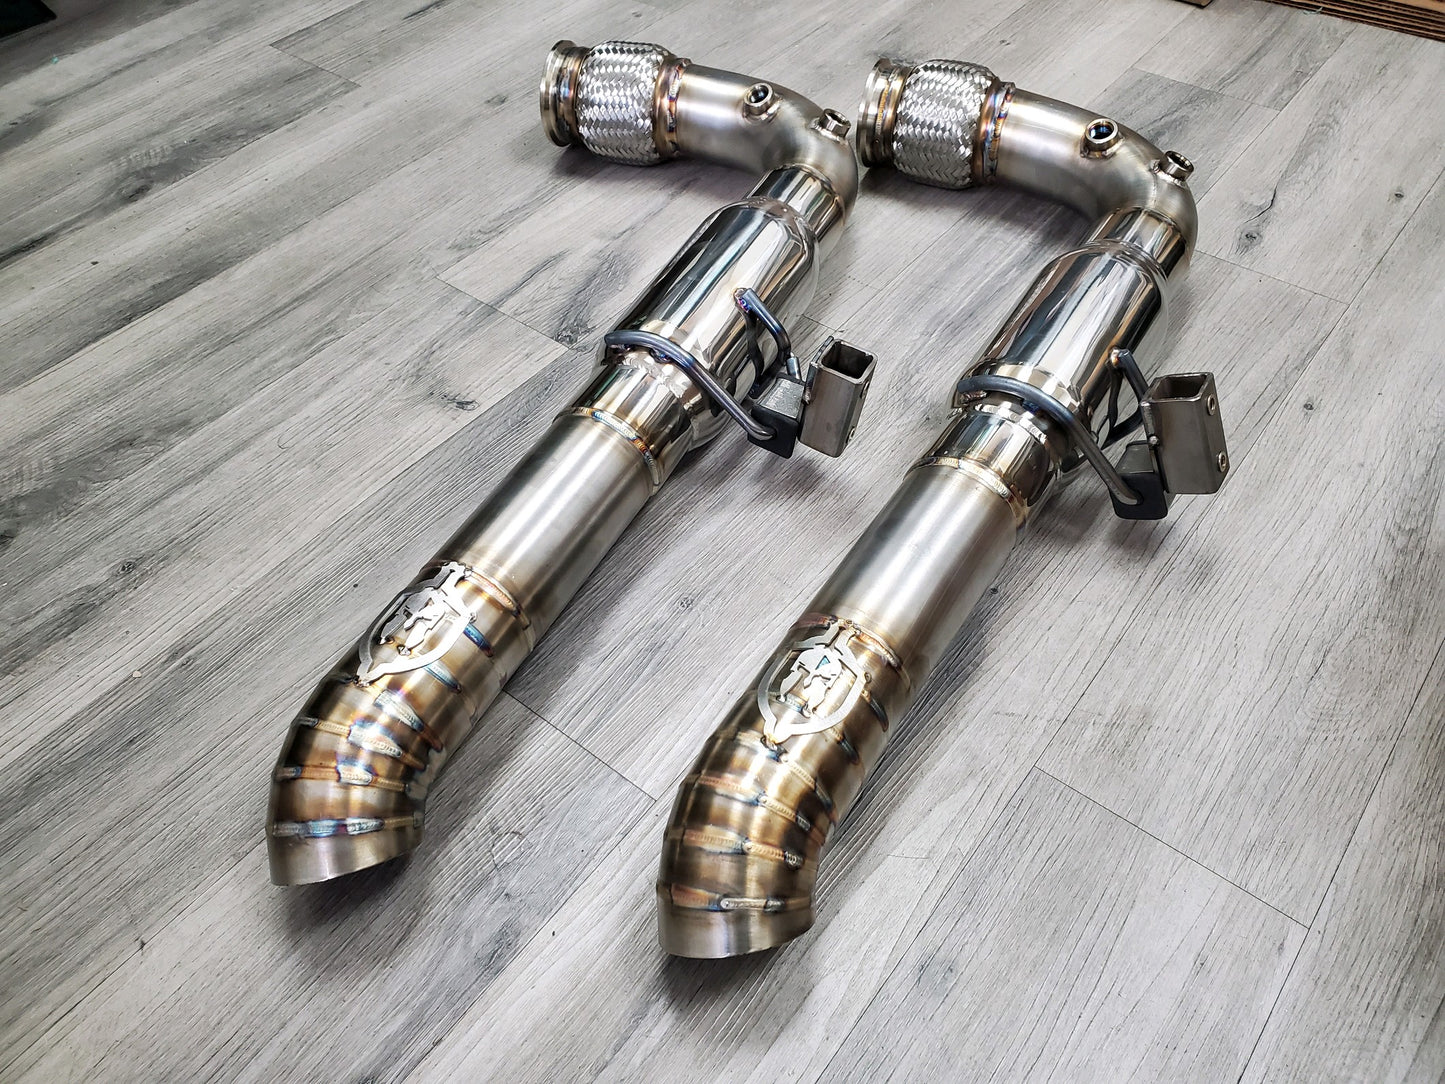 Ironclad Industries Can-Am x3 Lobster Tail Race Exhaust